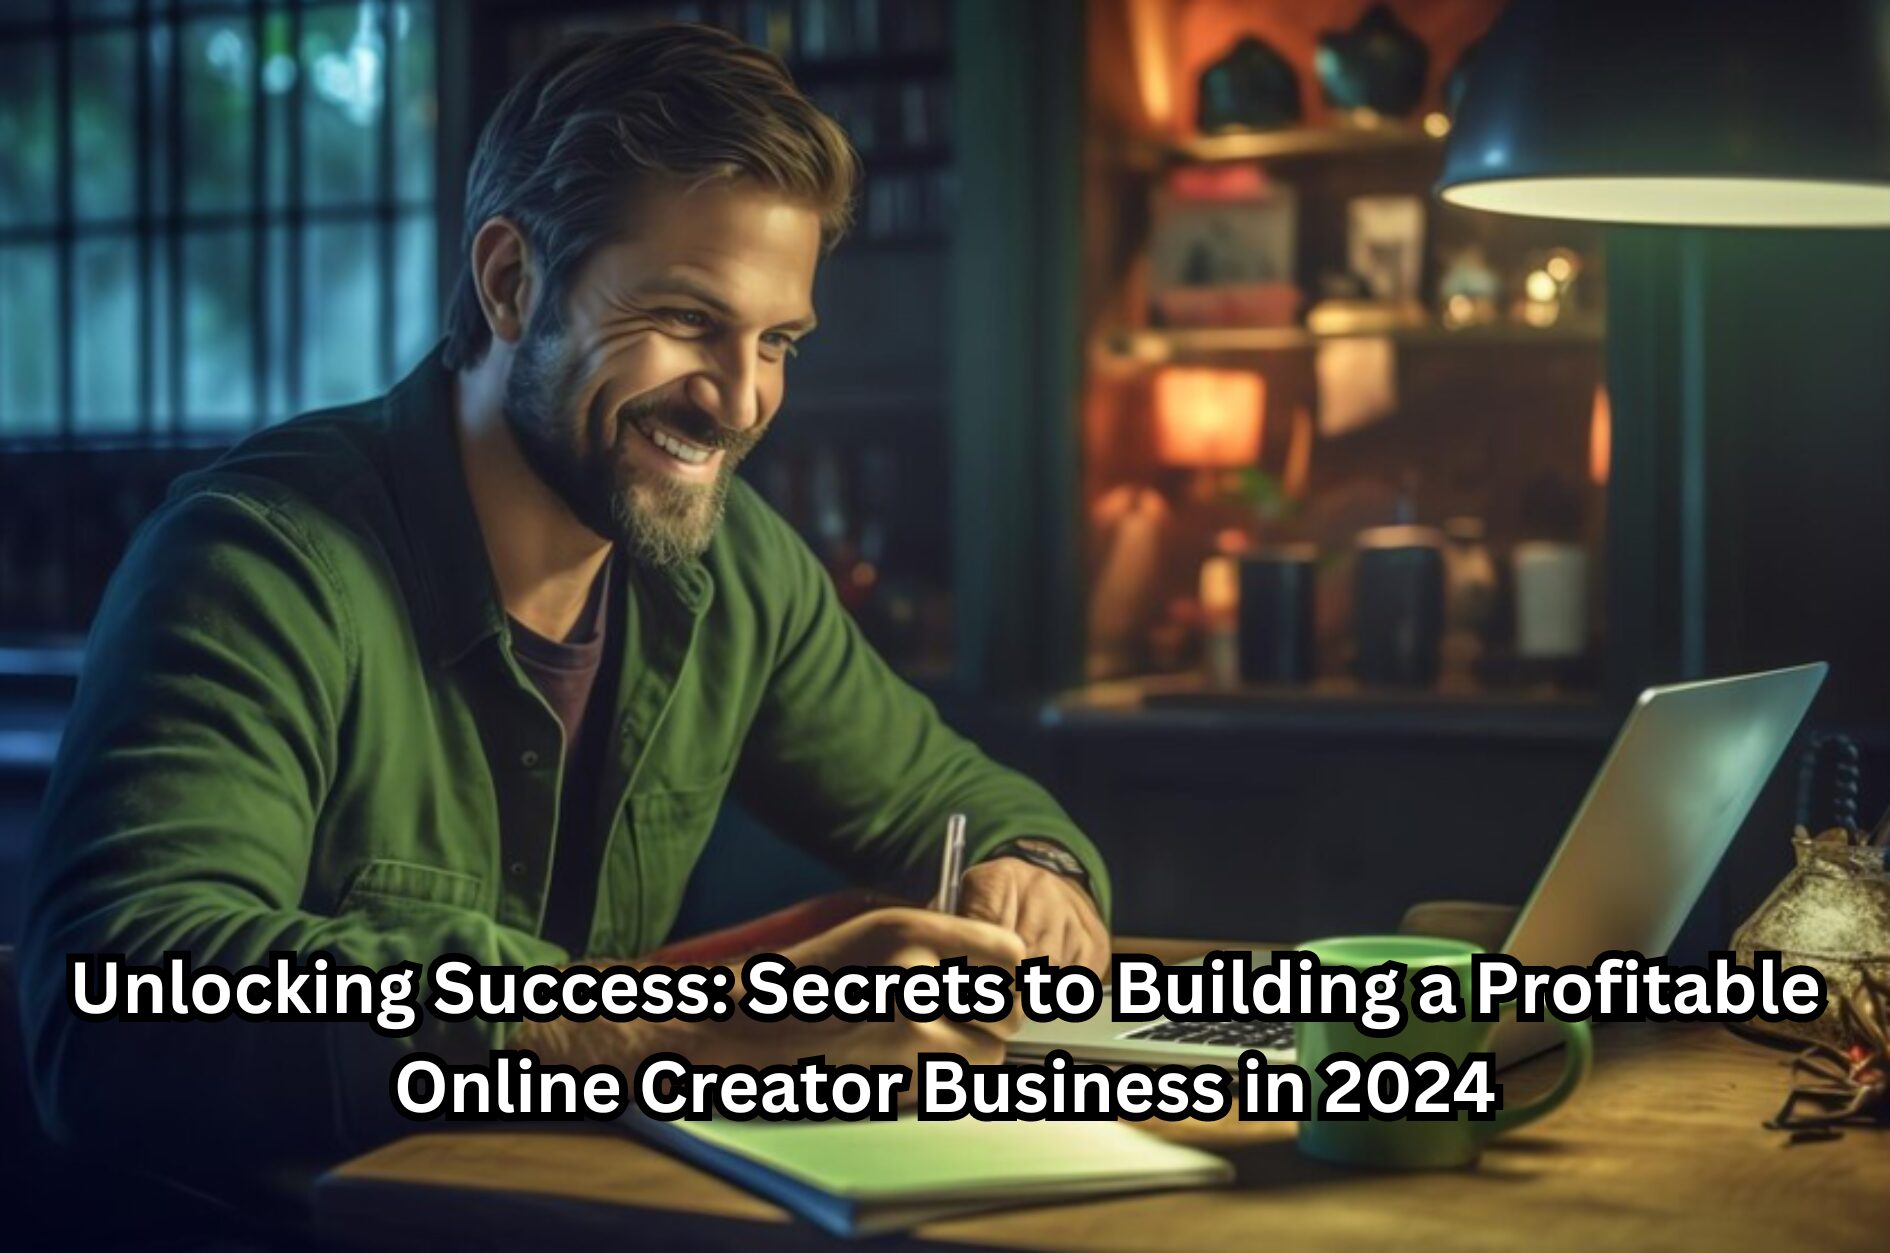 Person working on a laptop surrounded by icons depicting profitable online business opportunities in 2024.